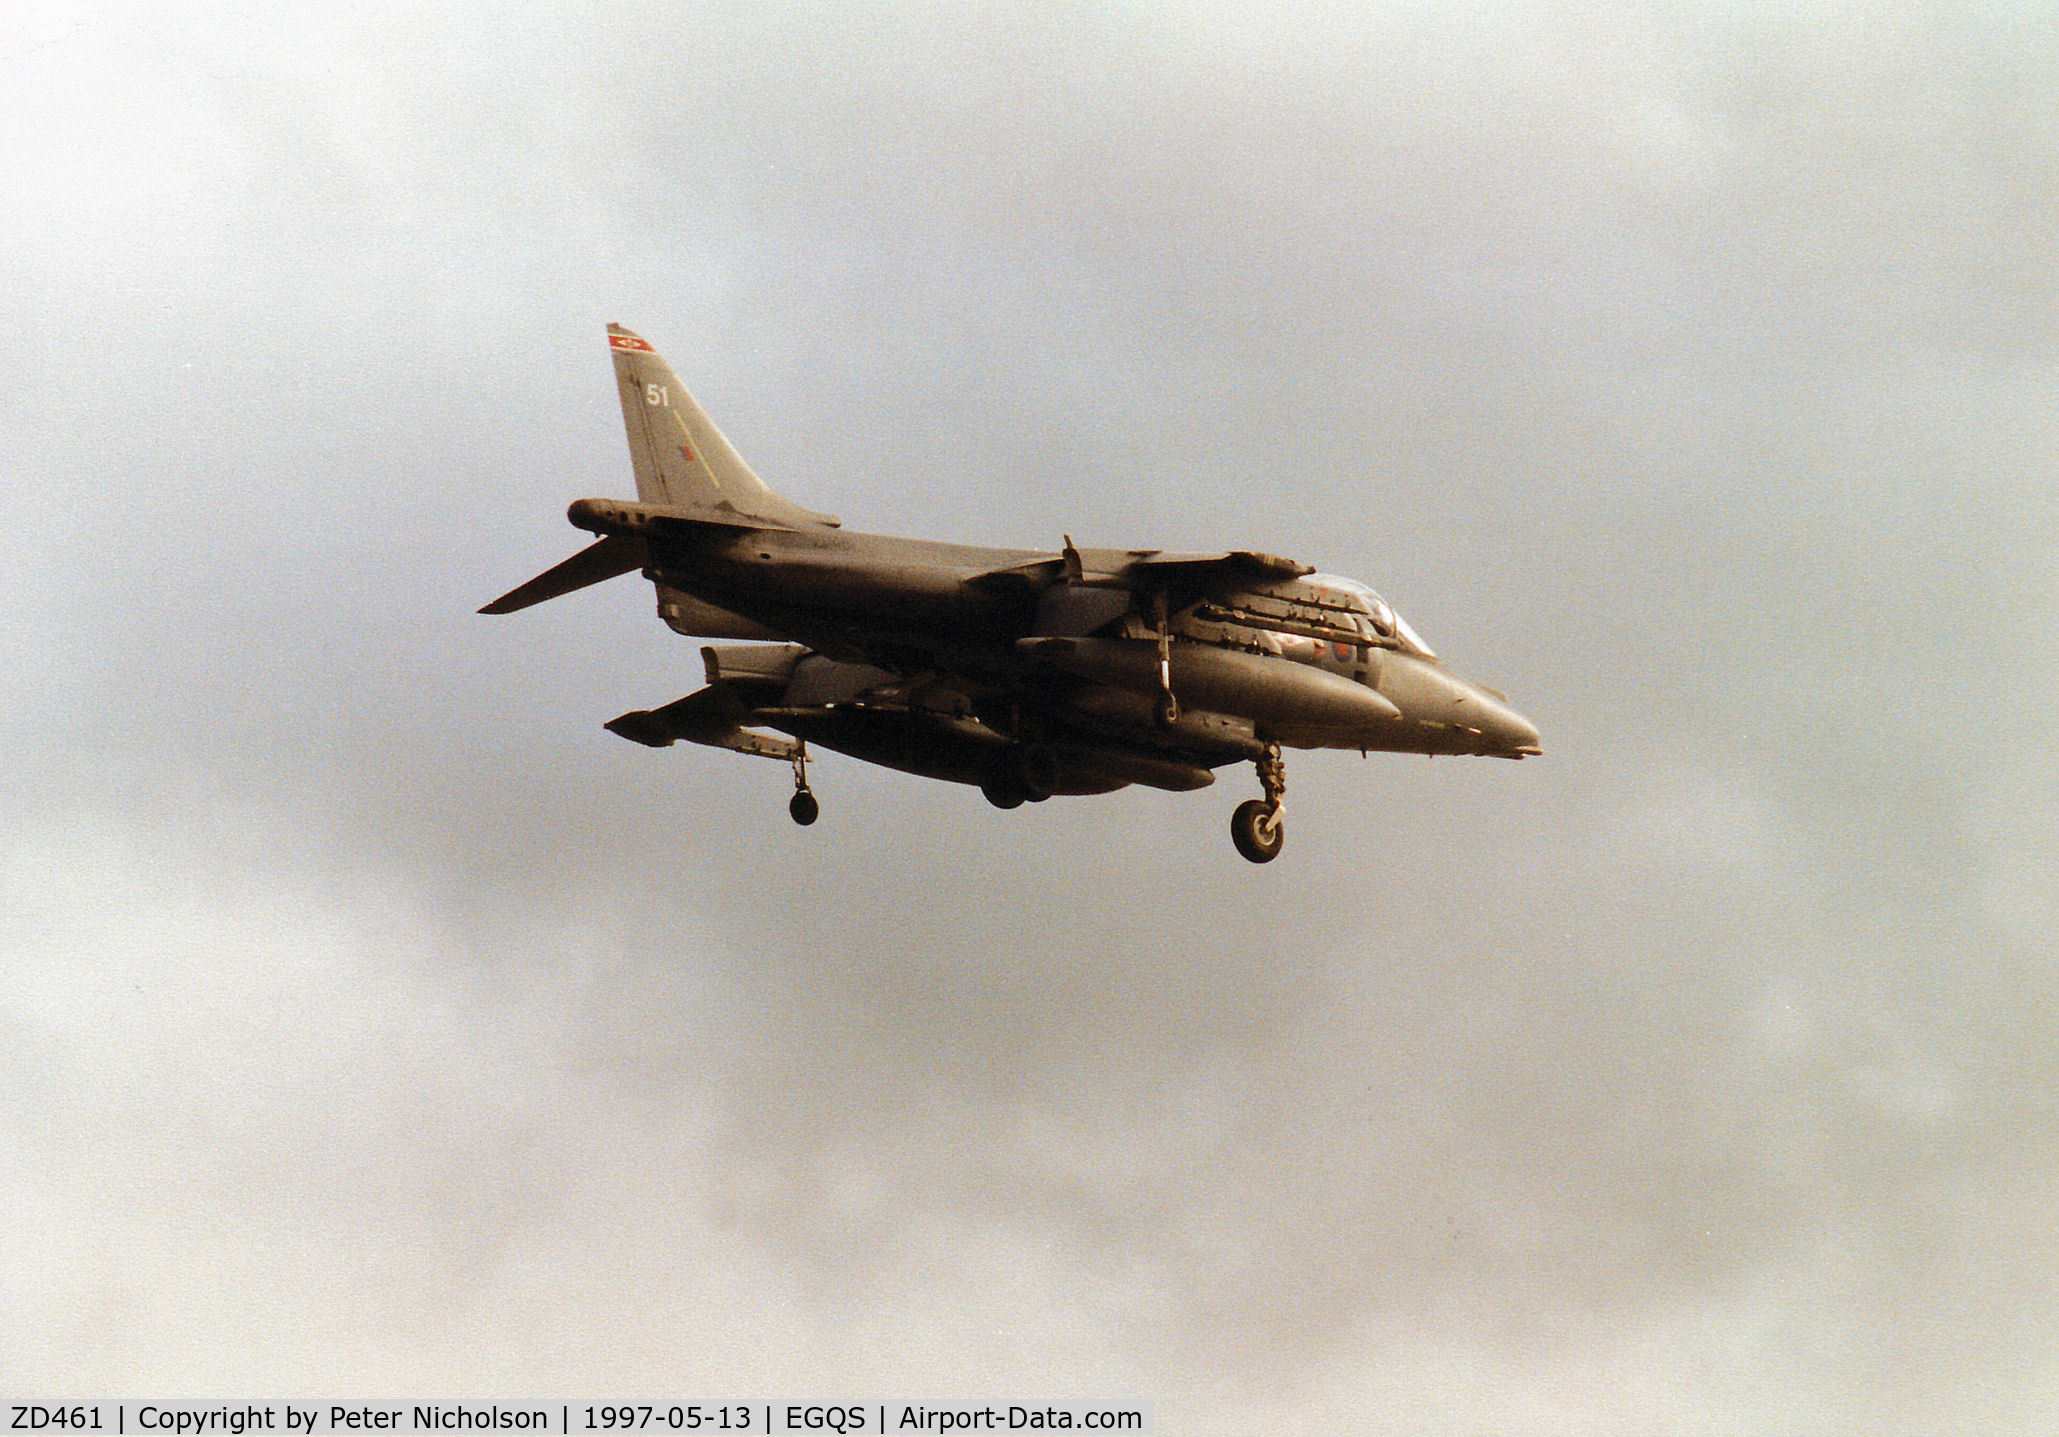 ZD461, 1989 British Aerospace Harrier GR.7 C/N P51, Harrier GR.7, callsign Wellard 2, of 1 Squadron at RAF Wittering on final approach to Runway 05 at RAF Lossiemouth in the Summer of 1997.